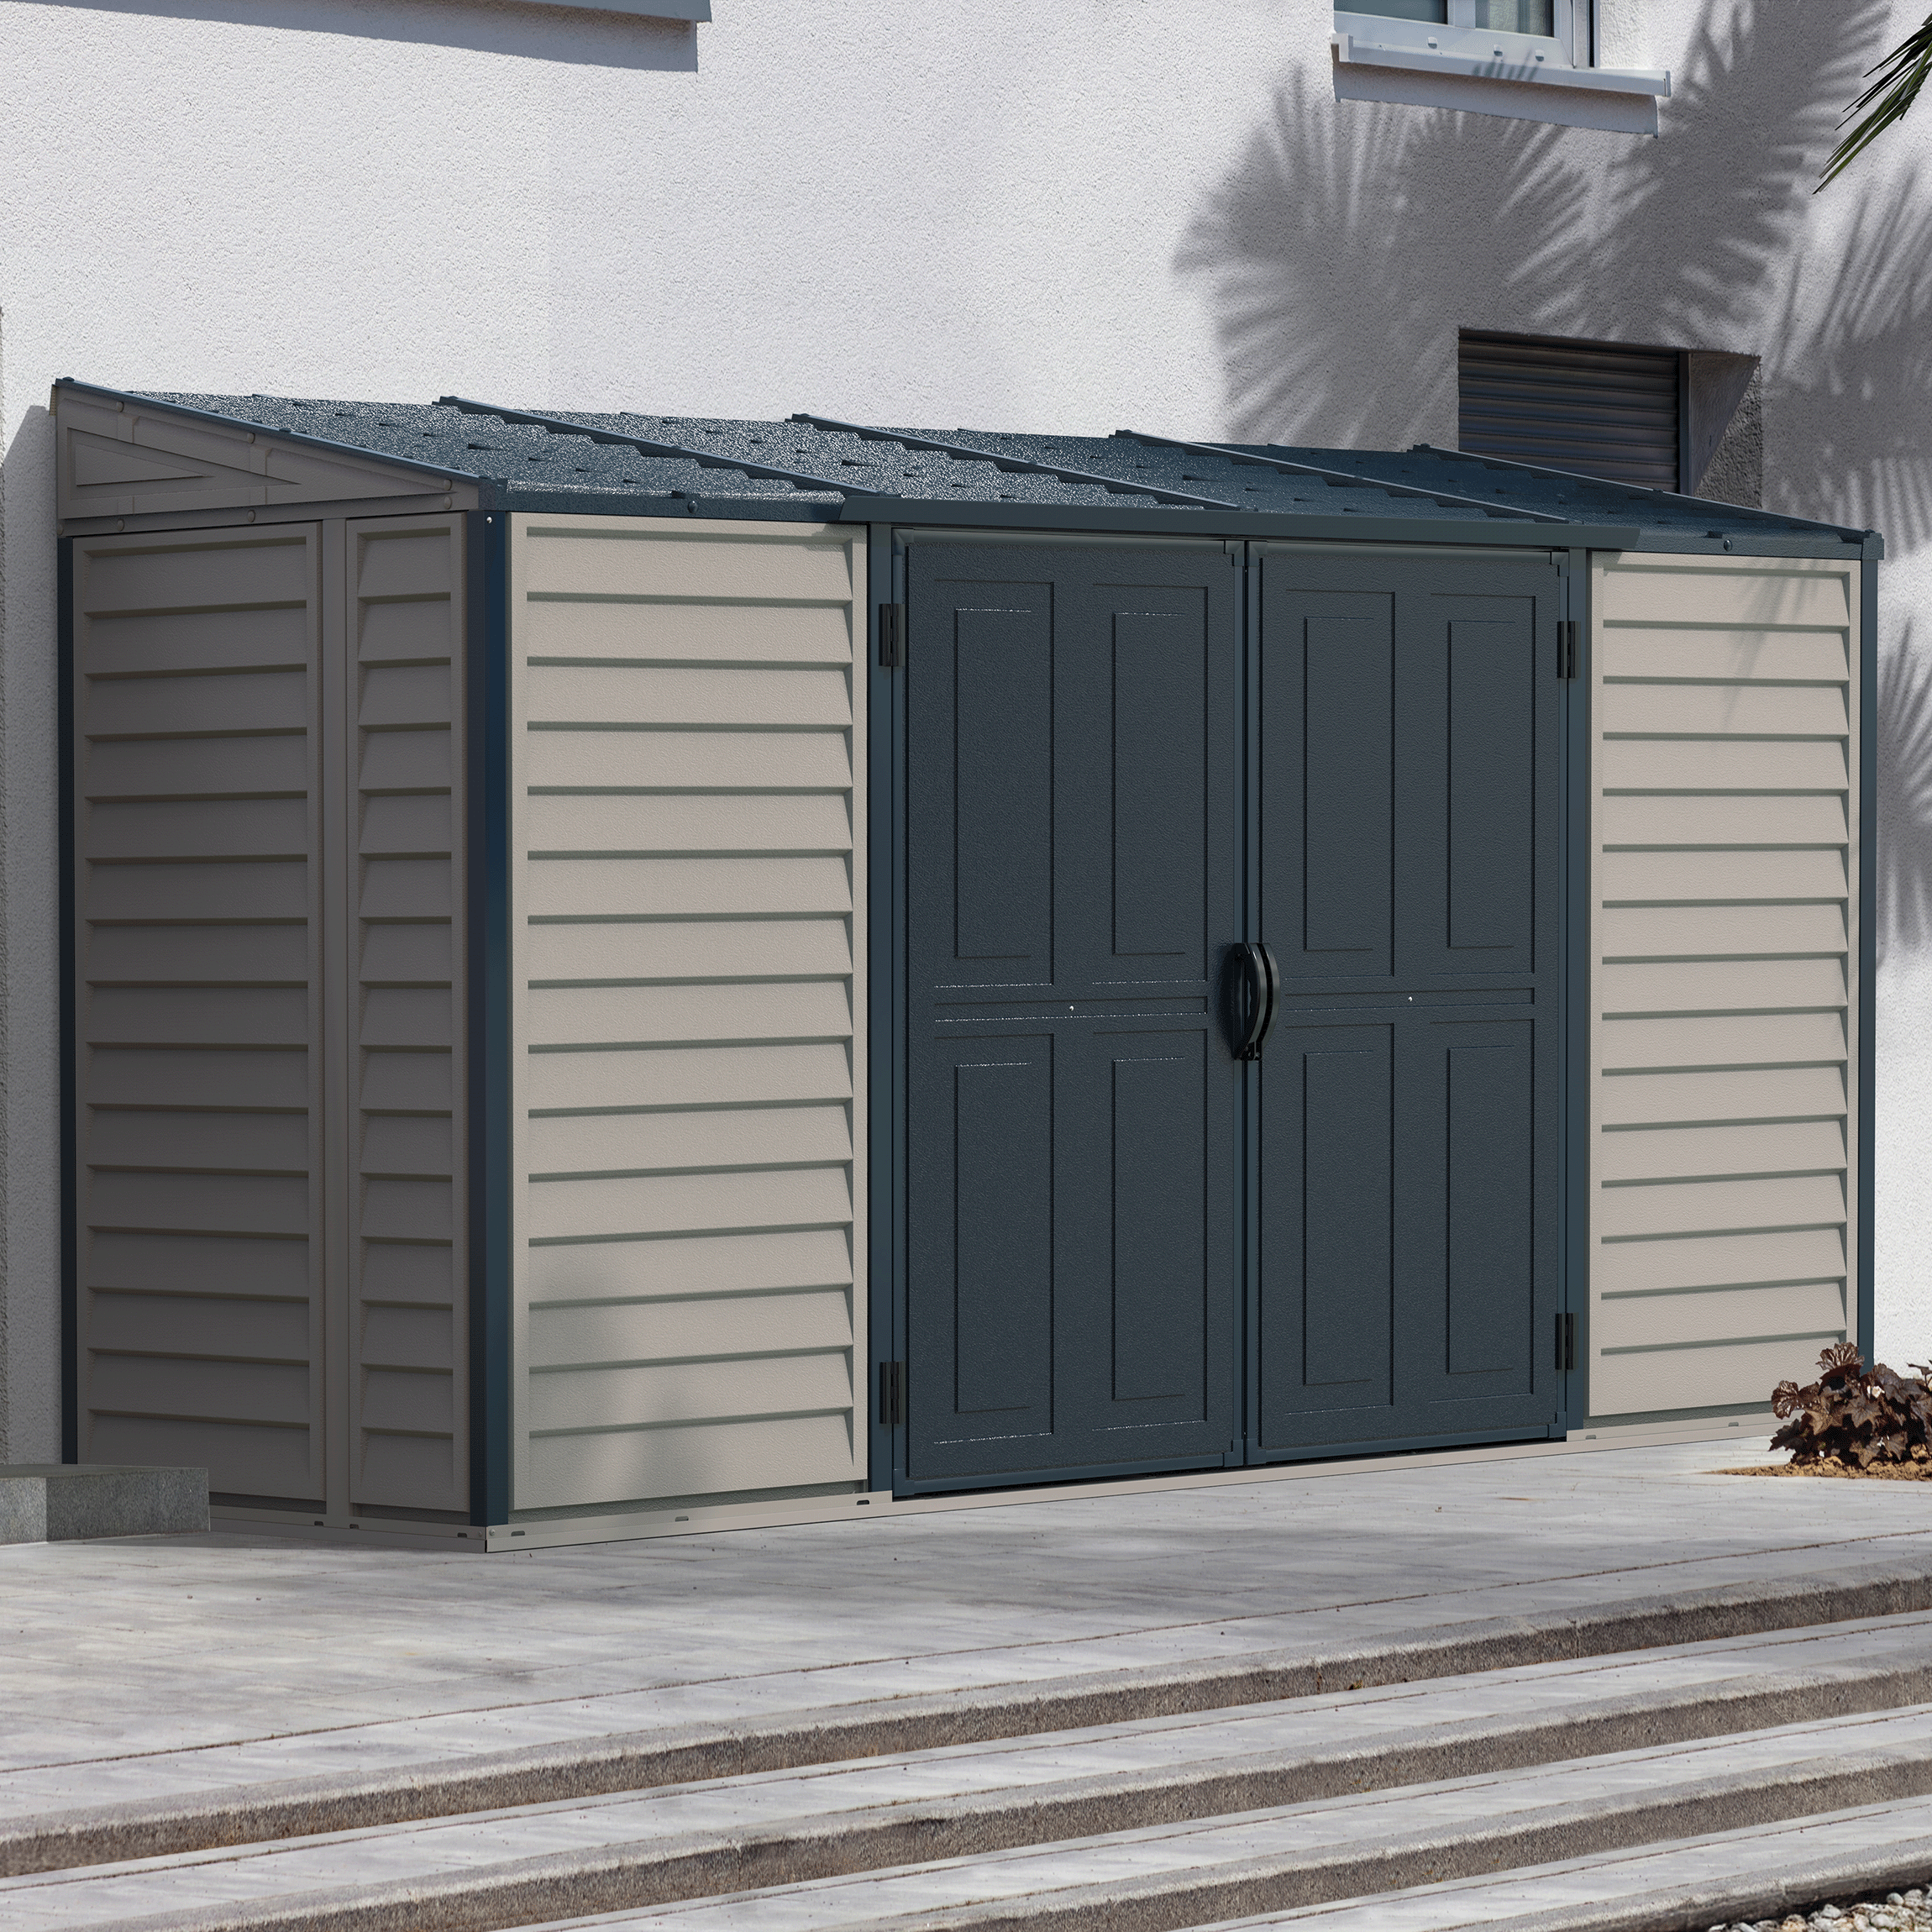 Duramax Vinyl Sheds DuraMax SideMate Plus Pro 10' x 4' Outdoor Storage Shed with Double Doors